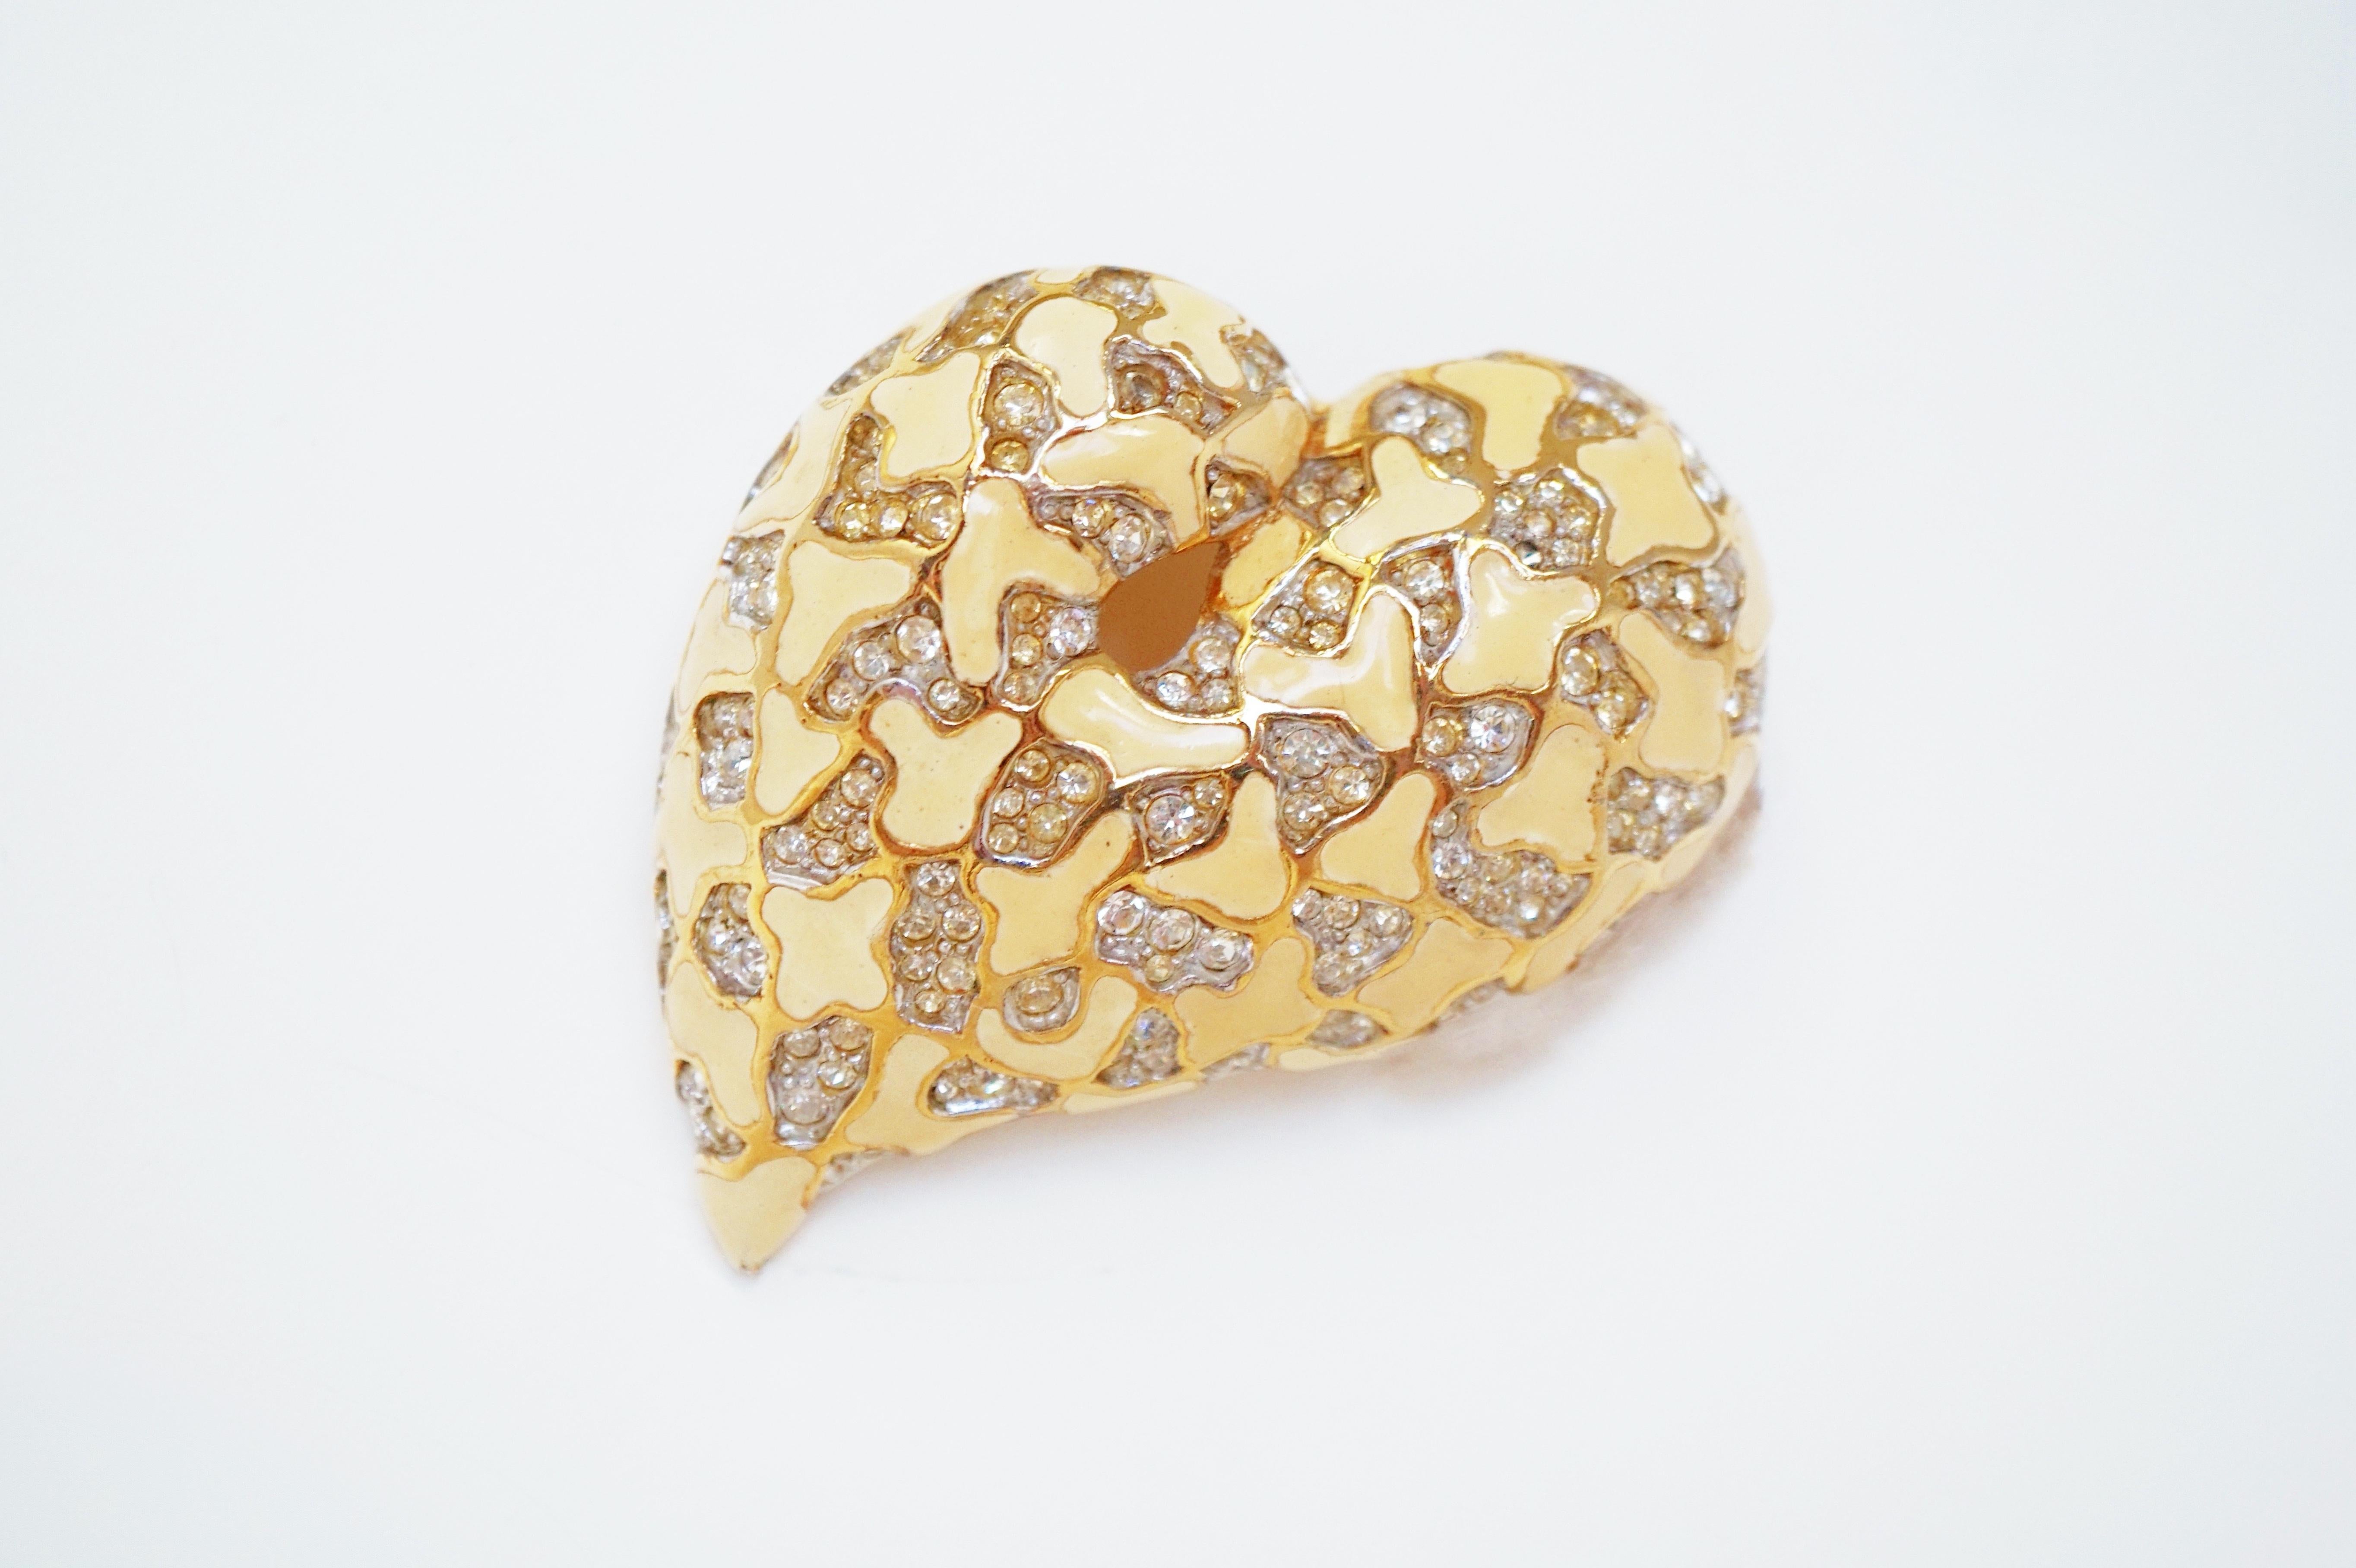 This beautiful and extremely rare three dimensional heart brooch by Jomaz, circa 1960, is a wonderful addition to a high end vintage costume jewelry collection and a gorgeous way to dress up any look!  Featuring high end Austrian crystals, gold